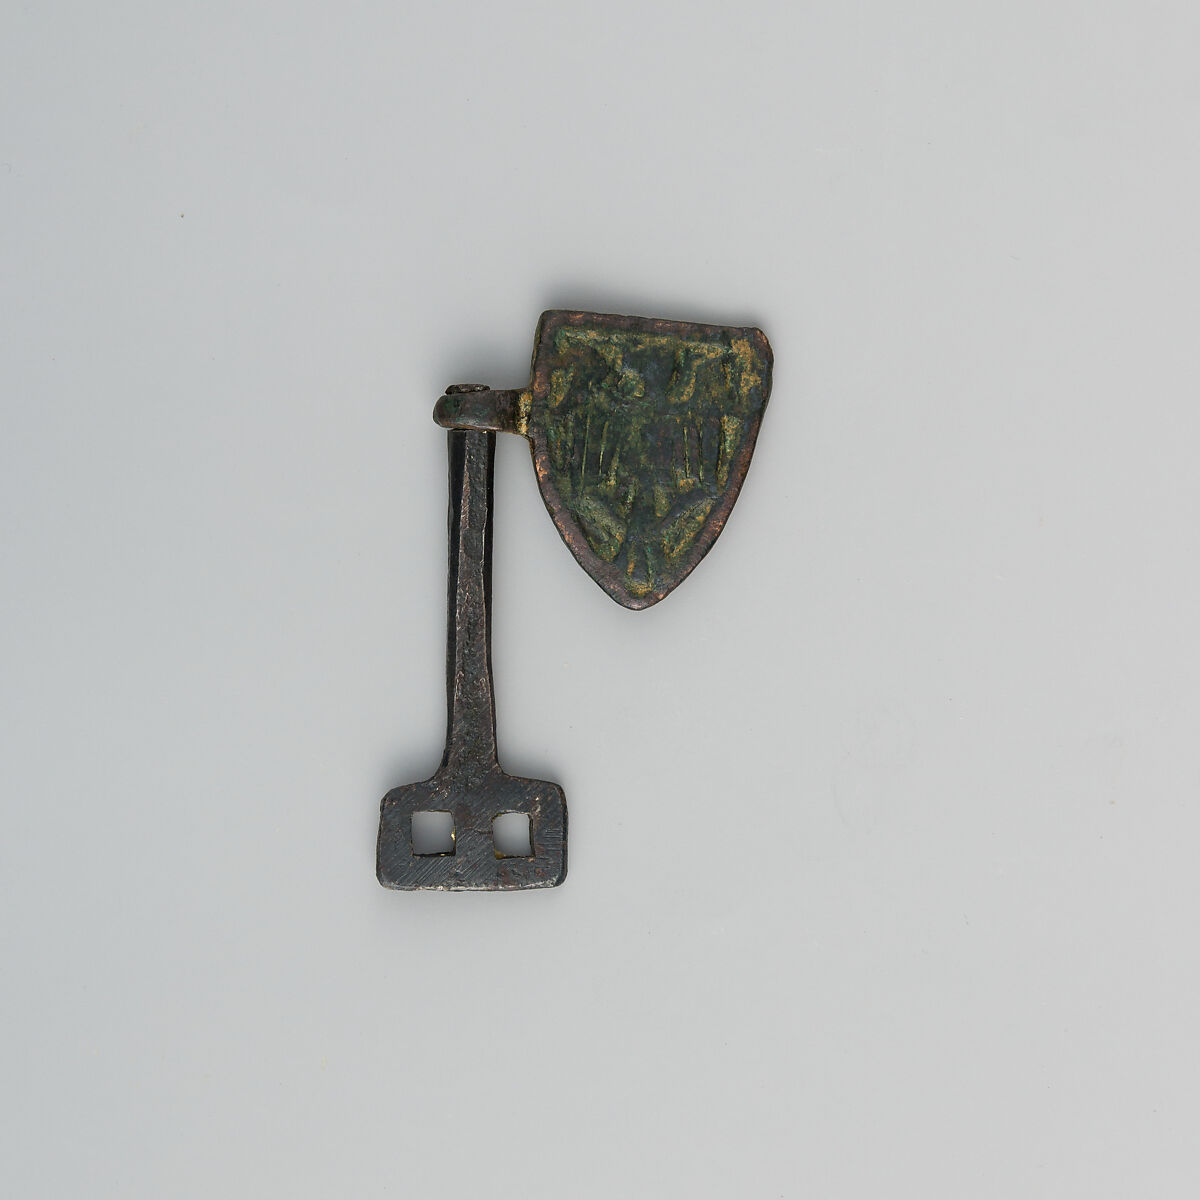 Badge or Harness Pendant, Copper, possibly British 